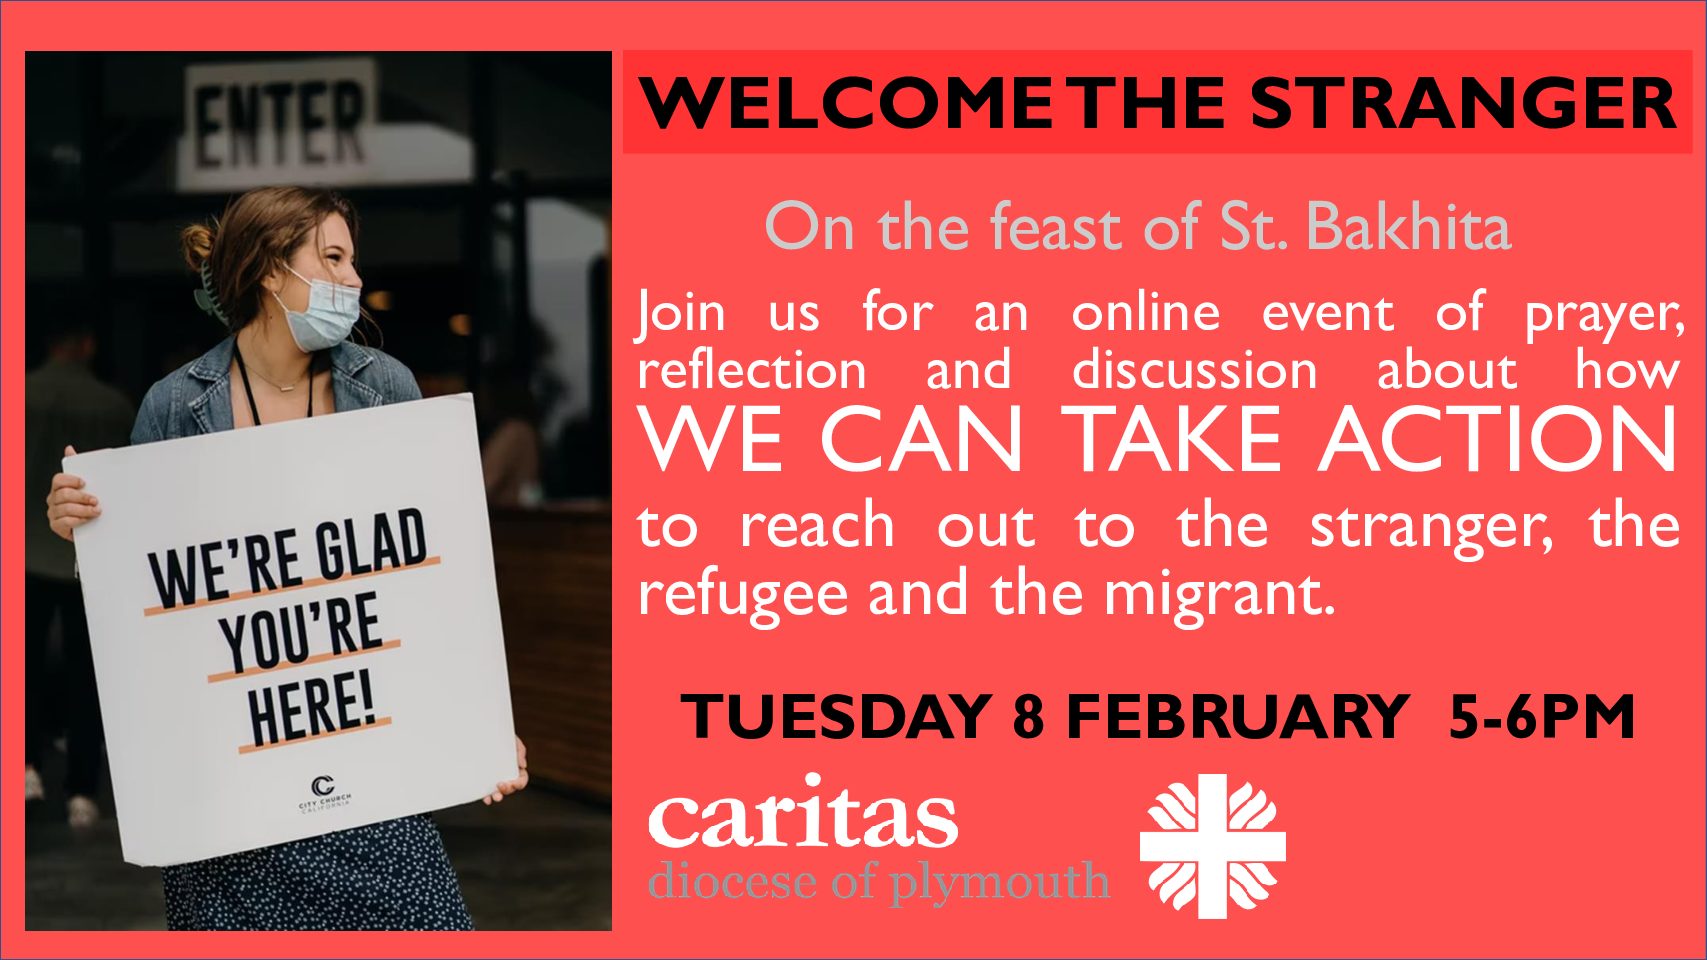 Welcome the Stranger – An Online Event on Tuesday 8 February